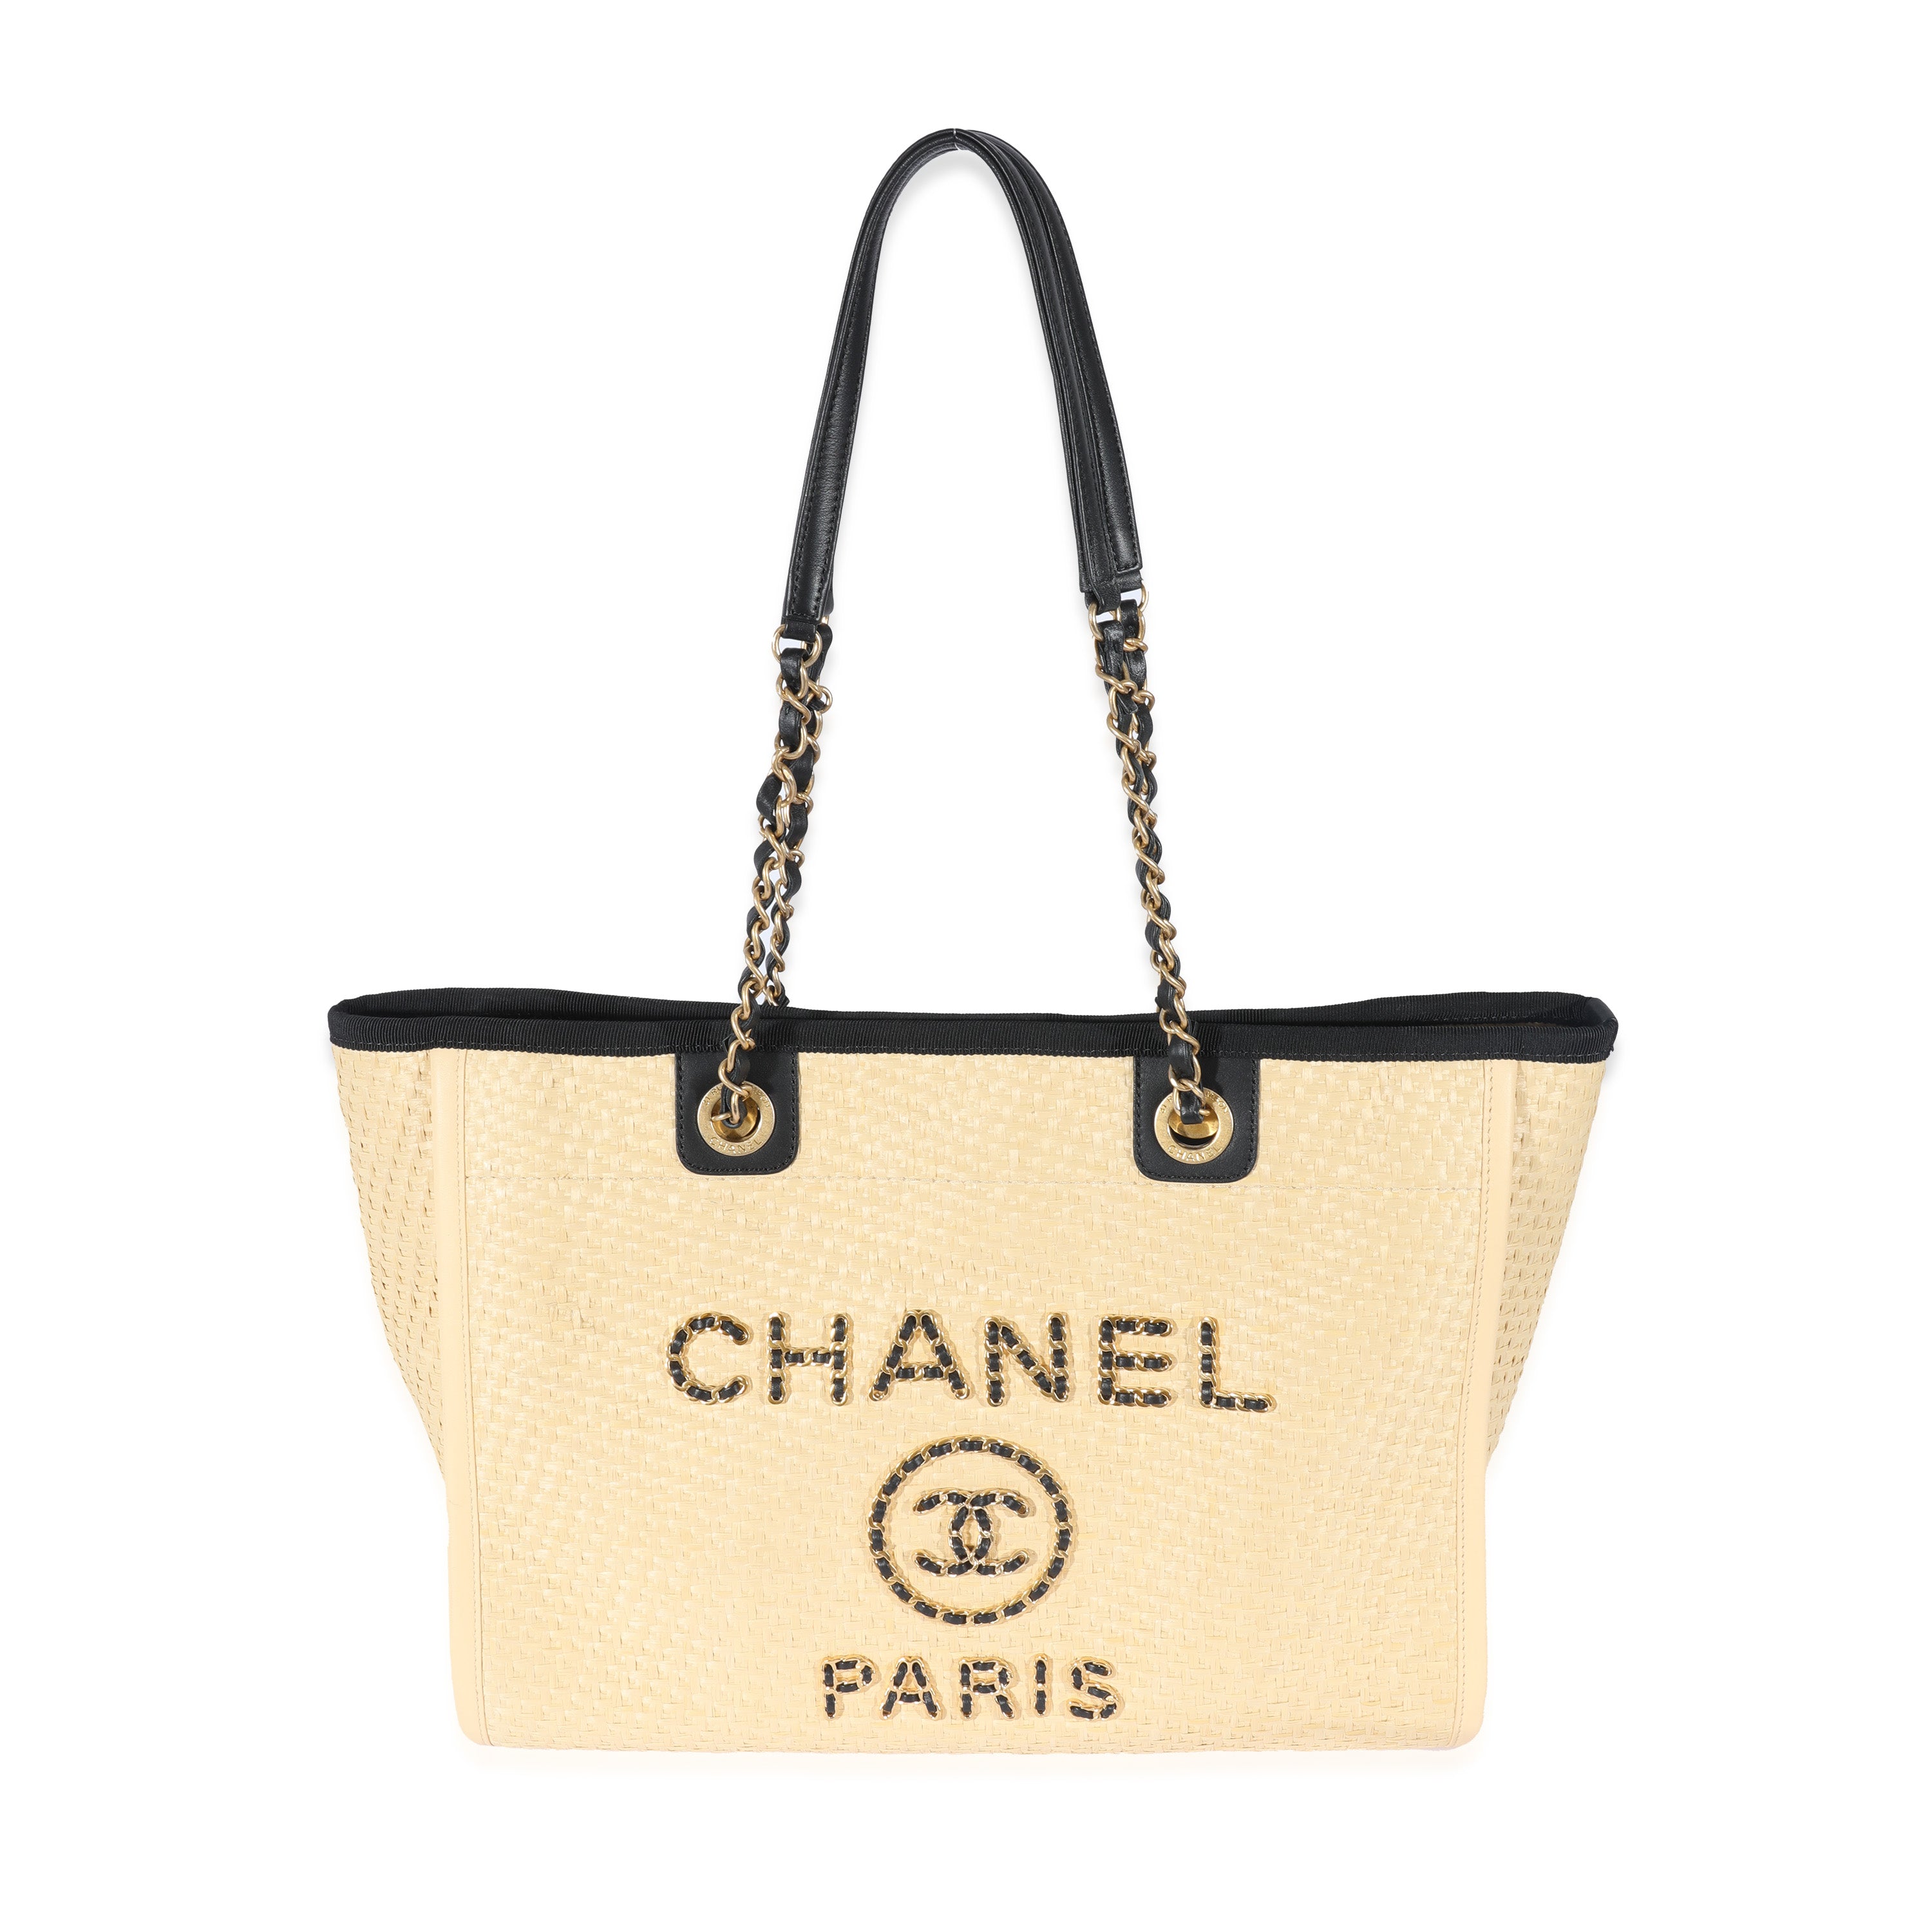 CHANEL DEAUVILLE: SMALL, MEDIUM, AND LARGE COMPARISON 